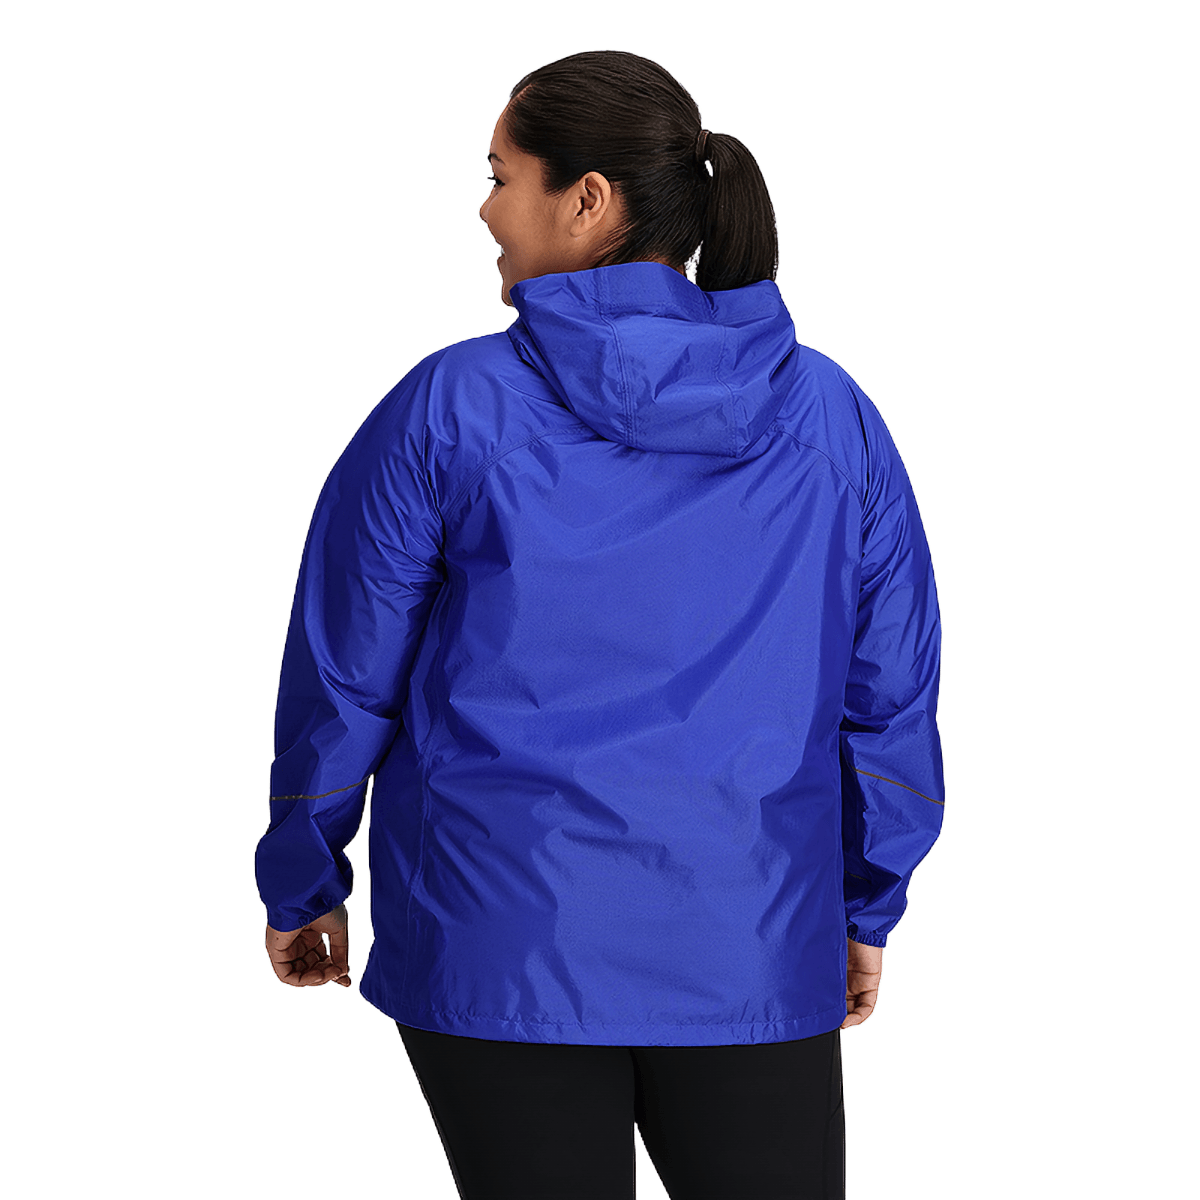 Outdoor Research Helium Rain Jacket Long-Term Review (How it